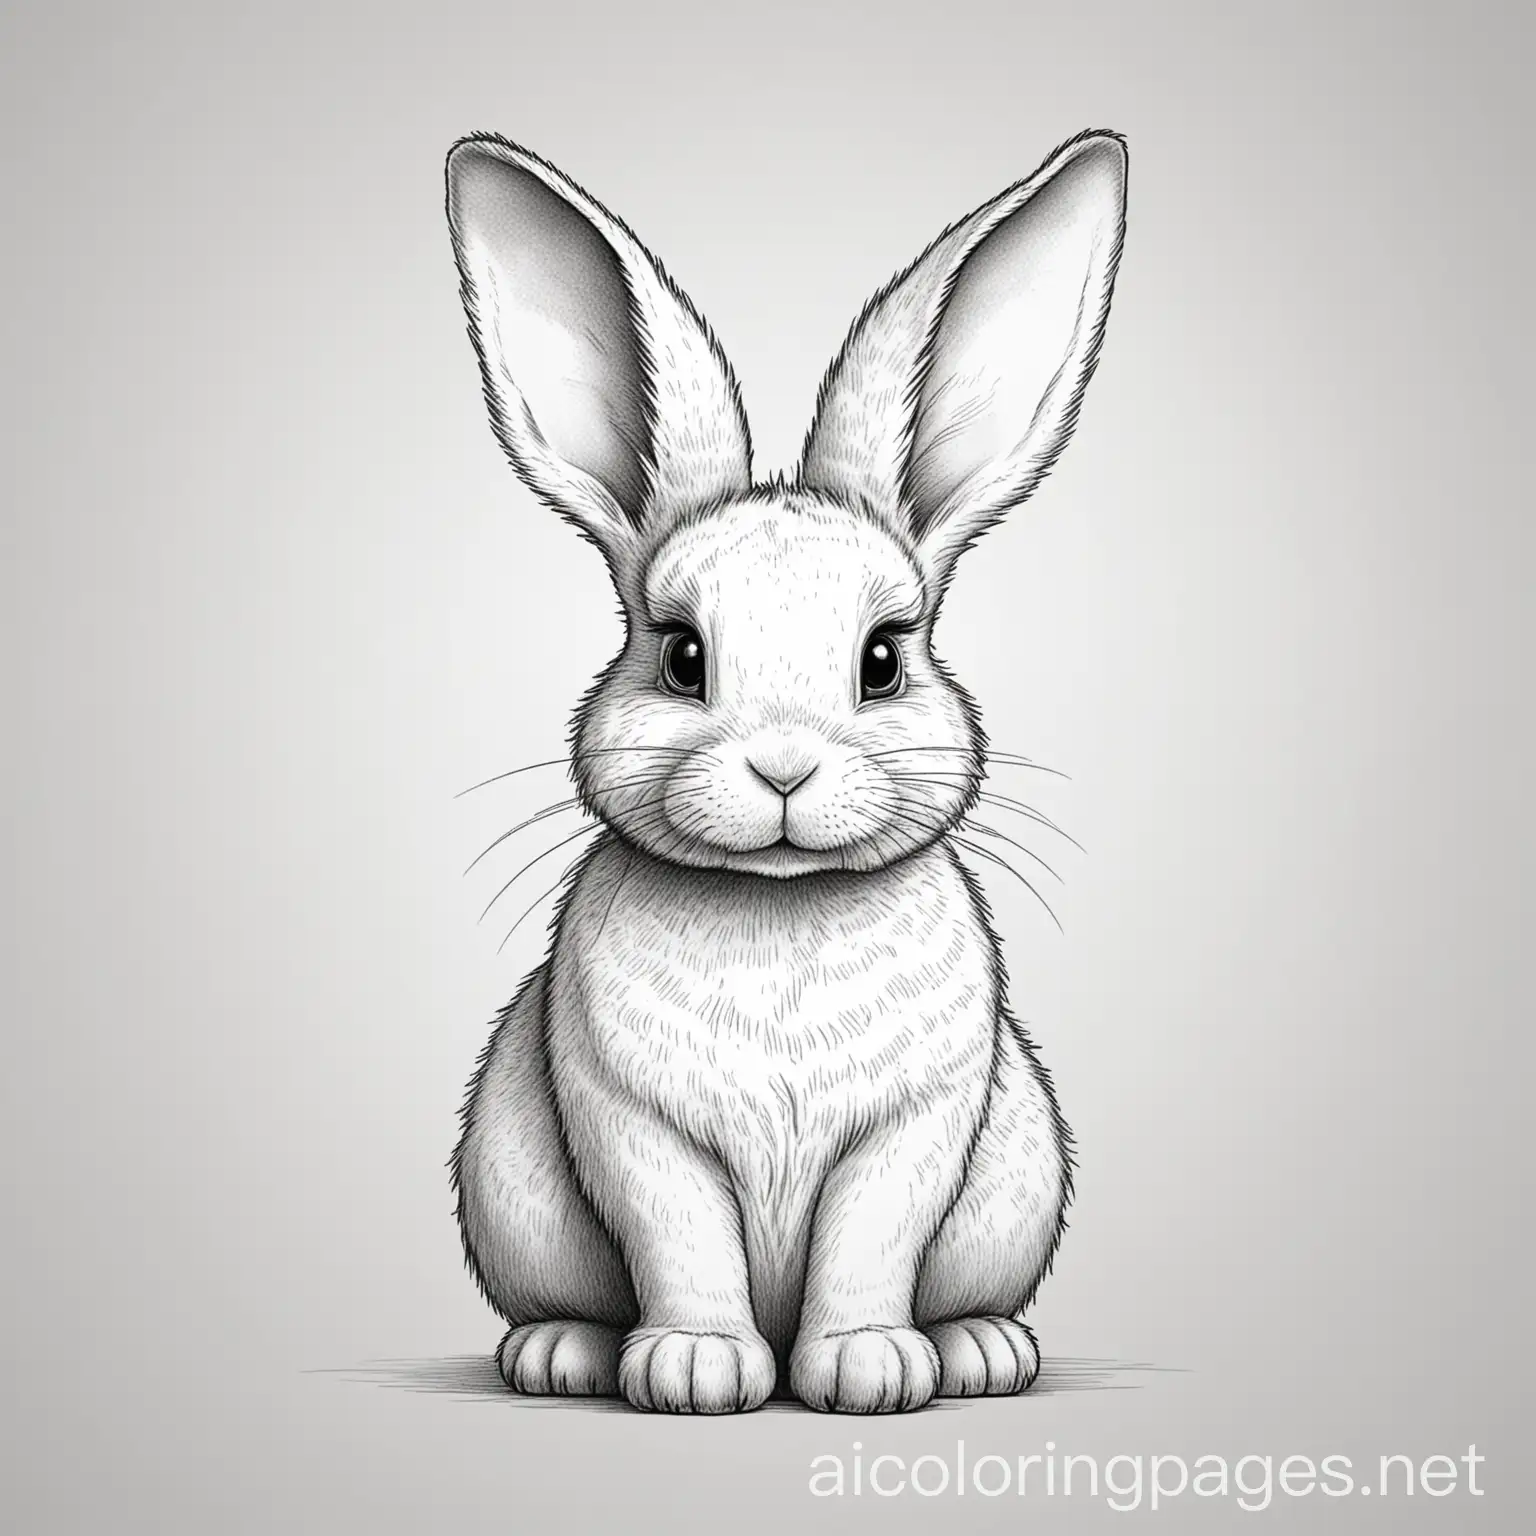 bunny, Coloring Page, black and white, line art, white background, Simplicity, Ample White Space